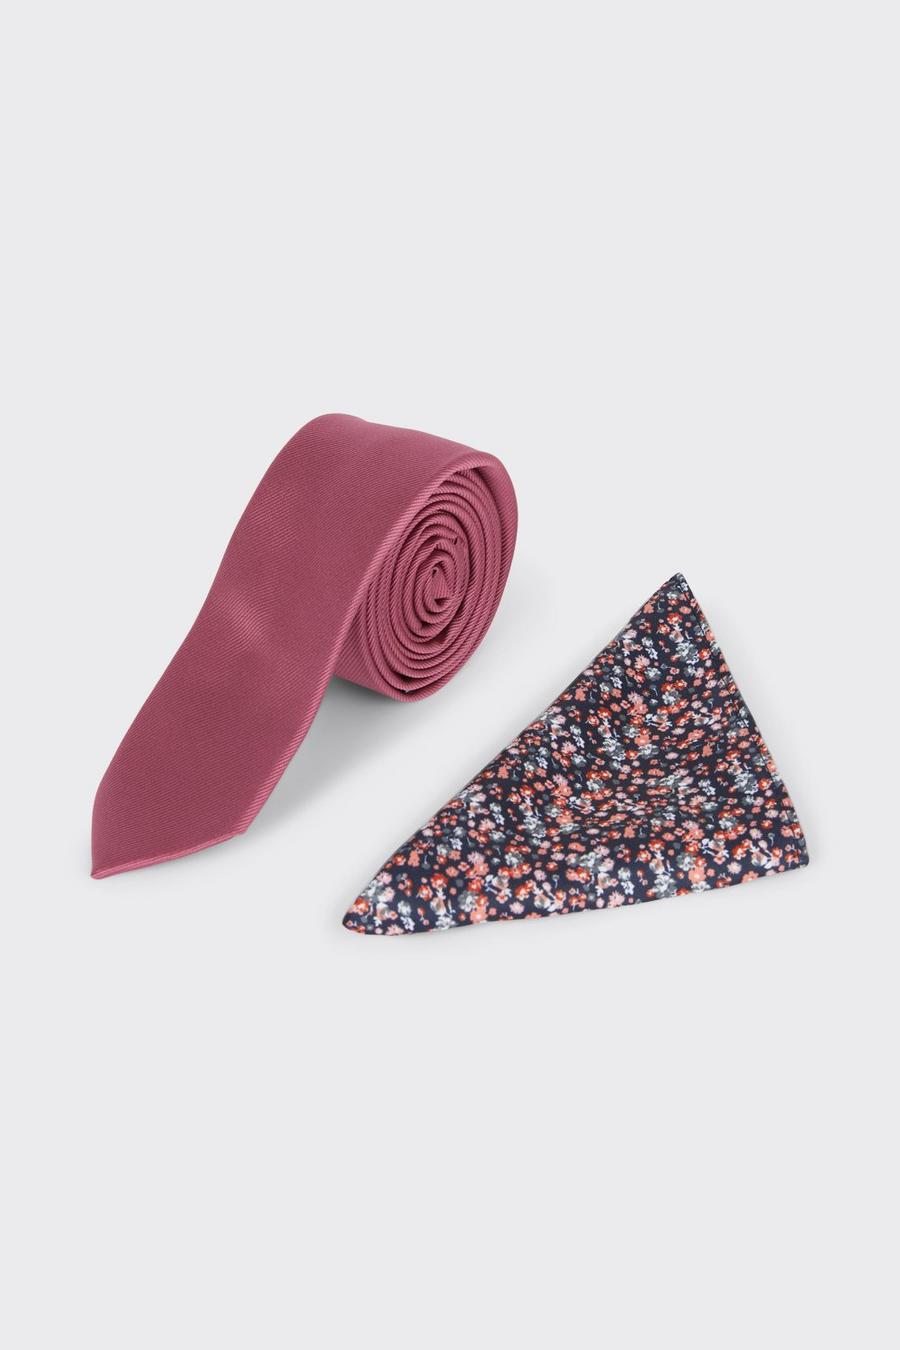 Pink Tie With Ditsy Pocket Square